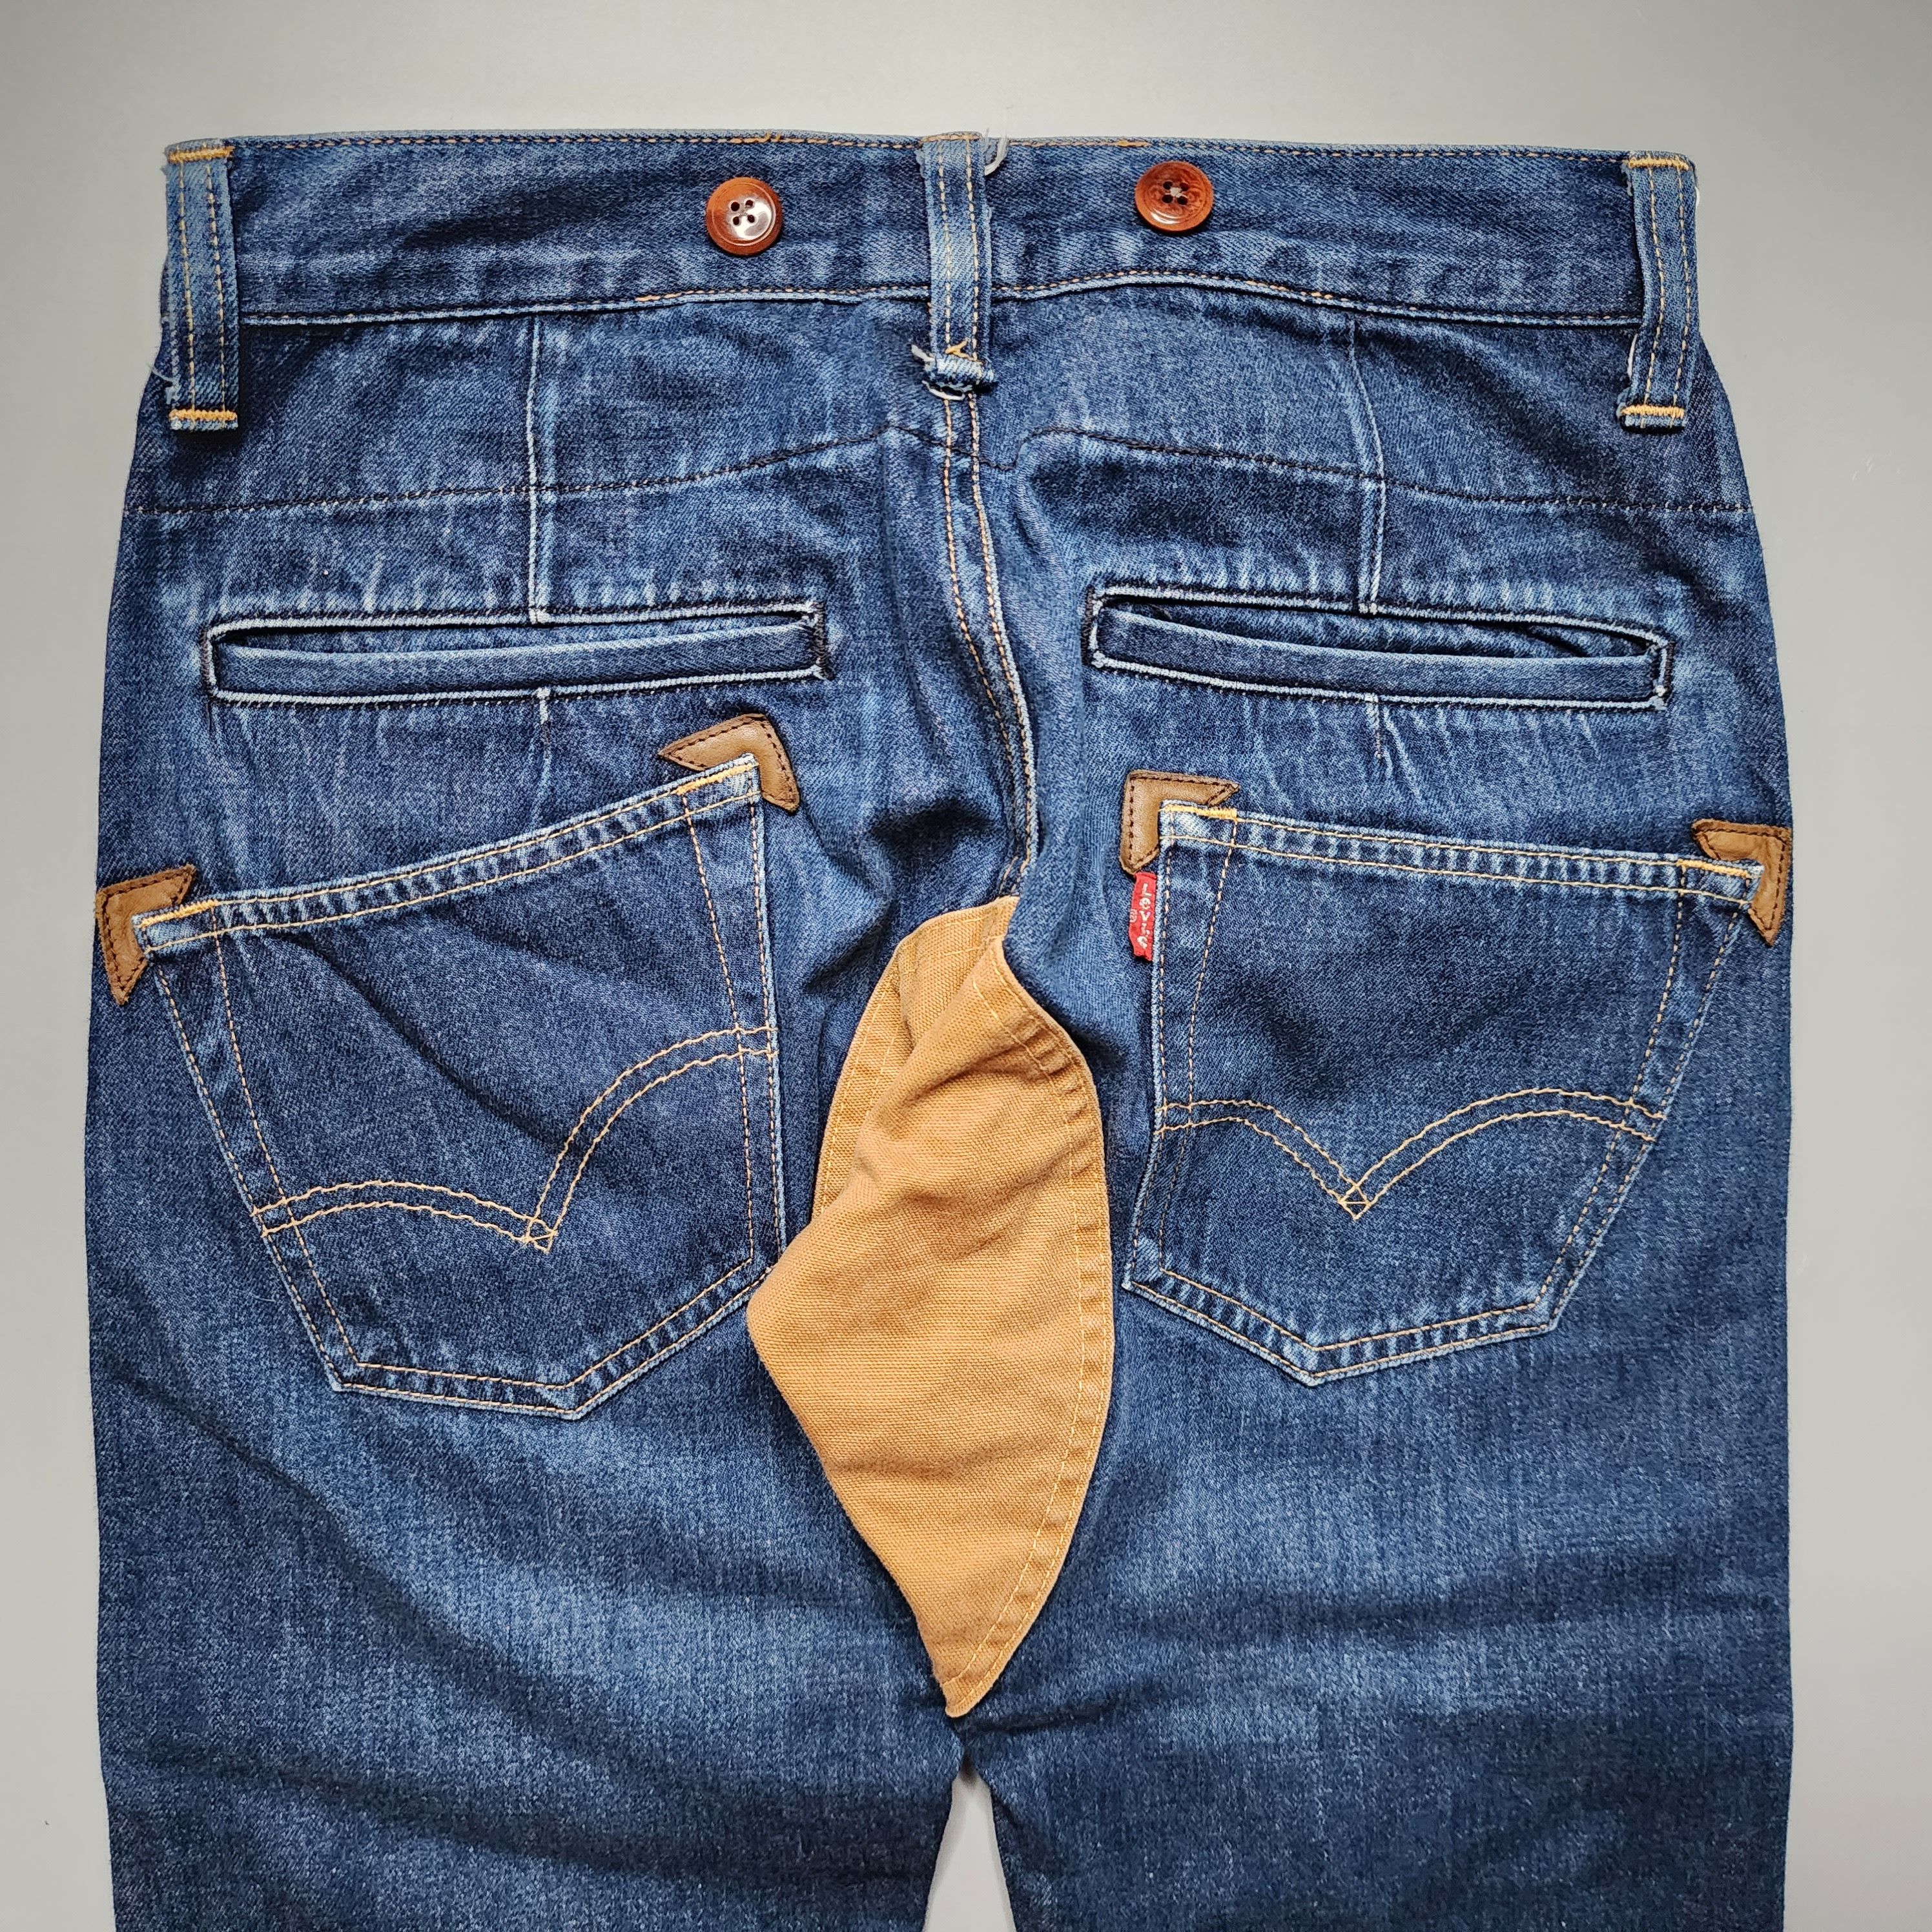 Junya Watanabe MAN- AW12 Contrast Patch Denim Cropped Jeans - 4